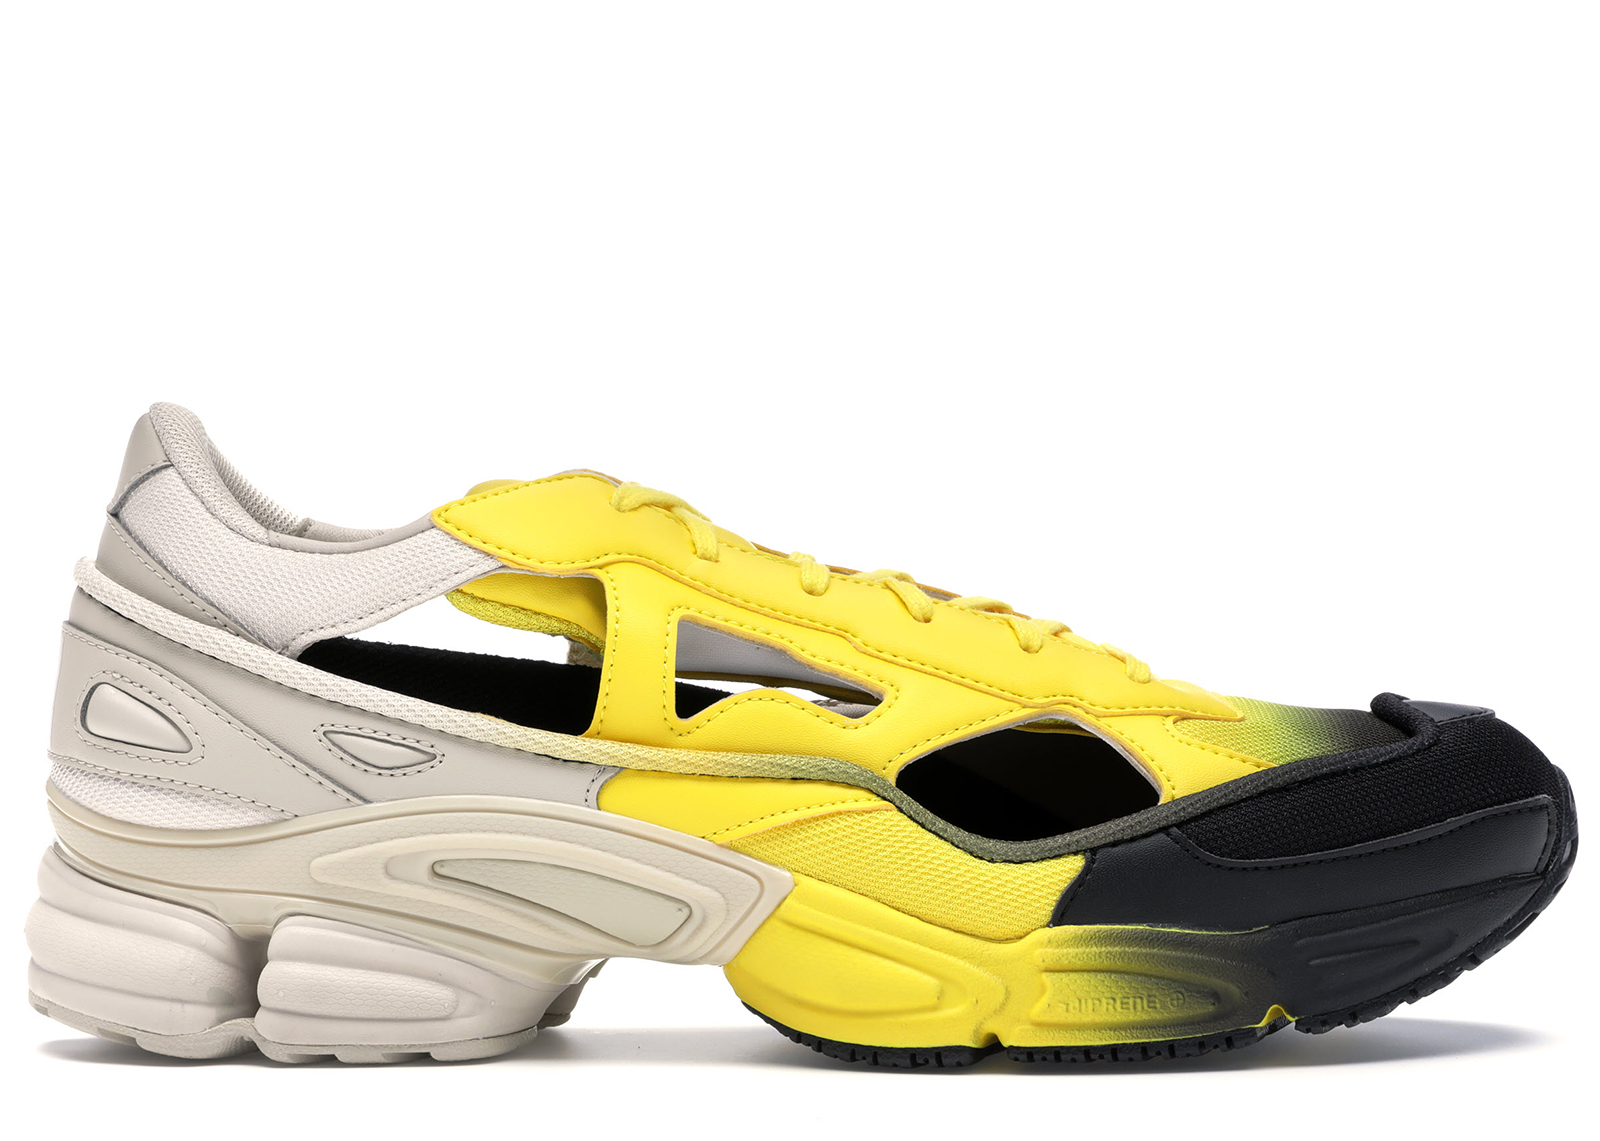 Buy adidas Raf Simons Shoes & Deadstock Sneakers